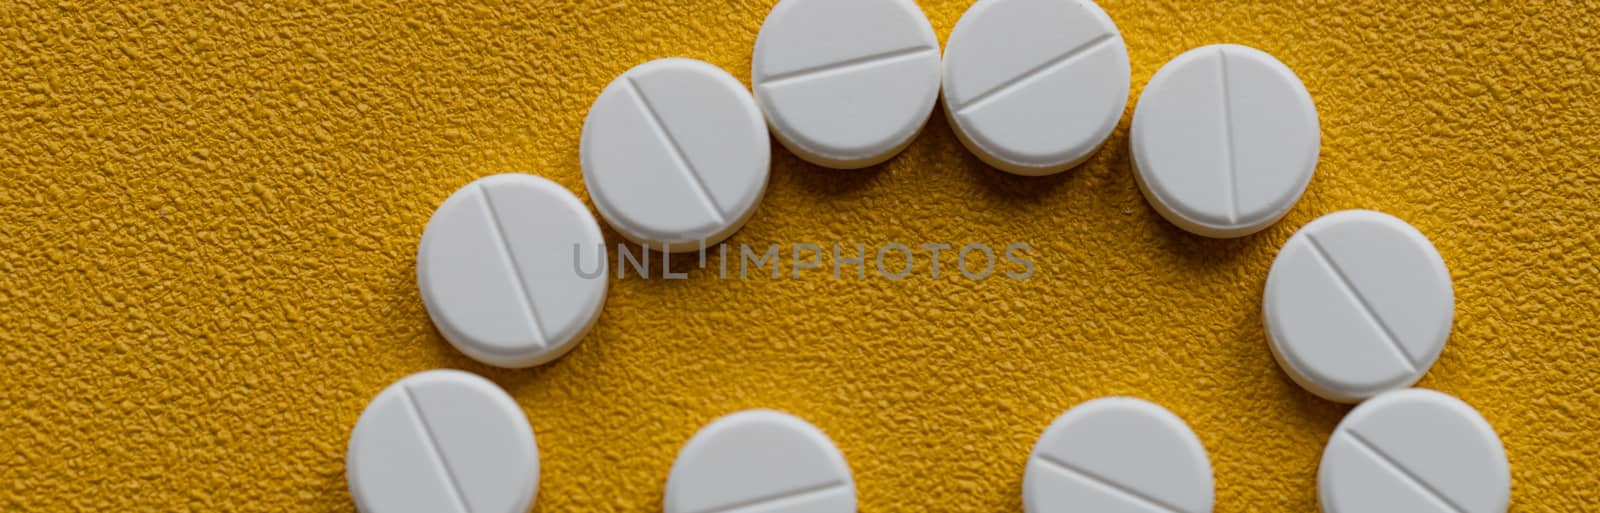 Trendy pattern made with Pharmaceutical medicine pills, tablets and capsules on bright light yellow background. Medicine creative concepts. Minimal style with colorful paper backdrop.